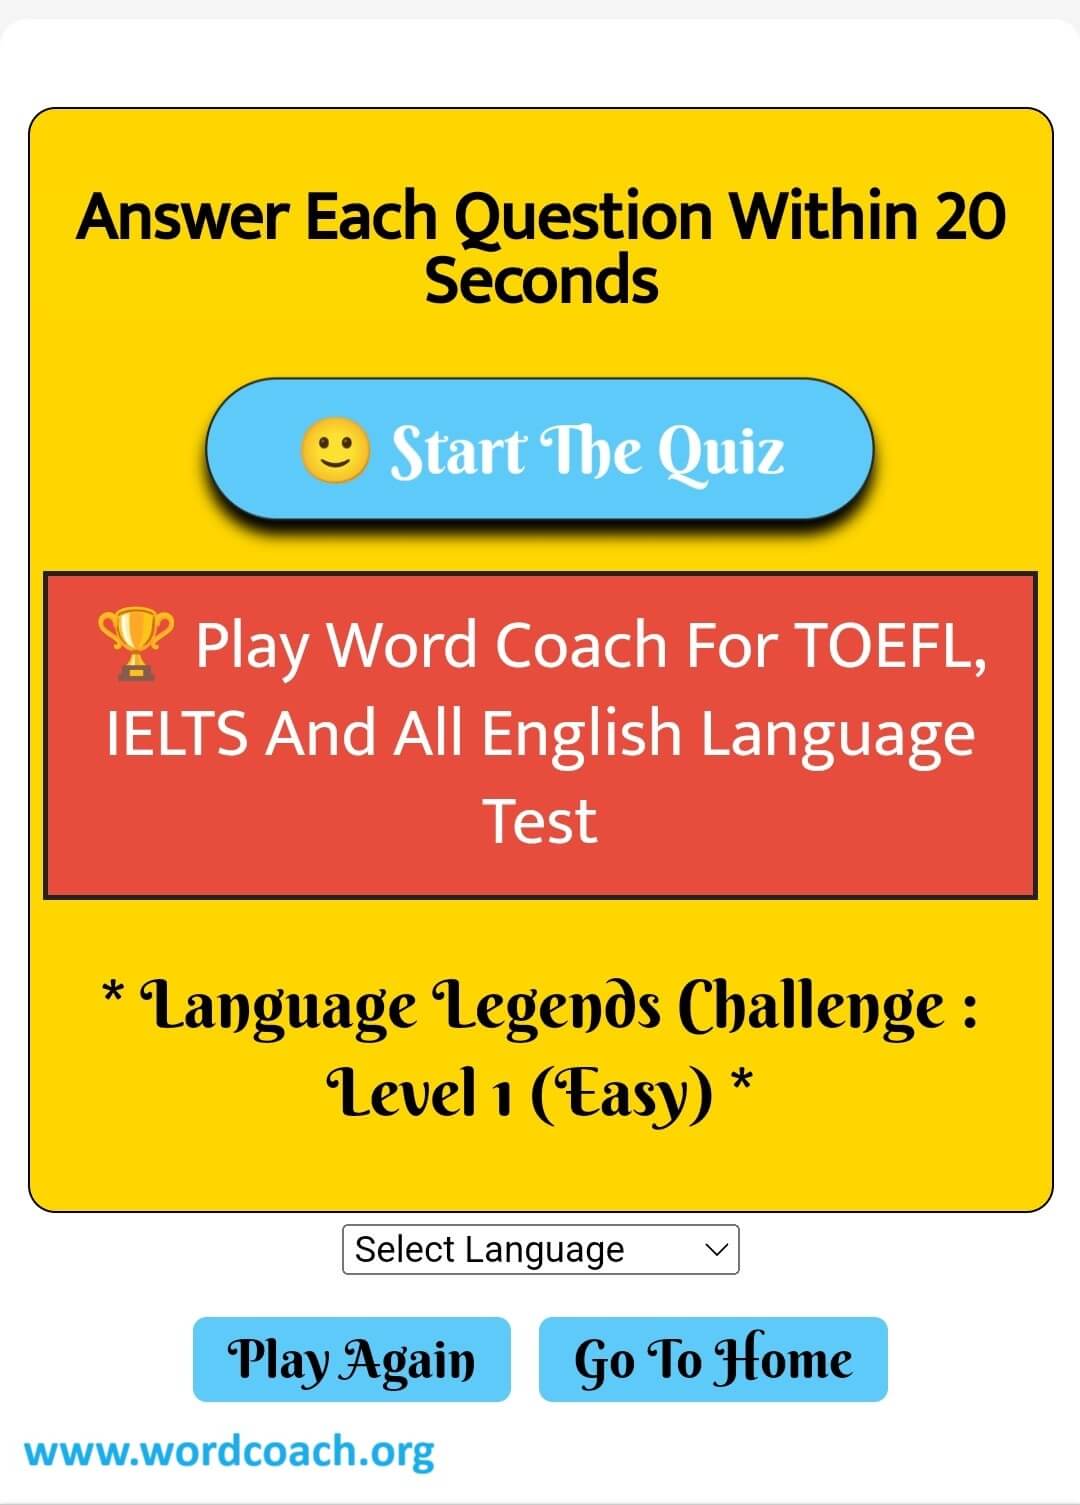 Enhance Your Vocabulary and Increase Your Chances of Success In TOEFL, IELTS, Cambridge English Exams (First, Advanced, Proficiency), PTE Academic, TOEIC, OET, BULATS, Duolingo English Test, Trinity College London ESOL Exams (GESE, ISE), and LanguageCert Exams (ESOL, SELT) & More with Our Word Coach Quiz Game - www.wordcoach.org